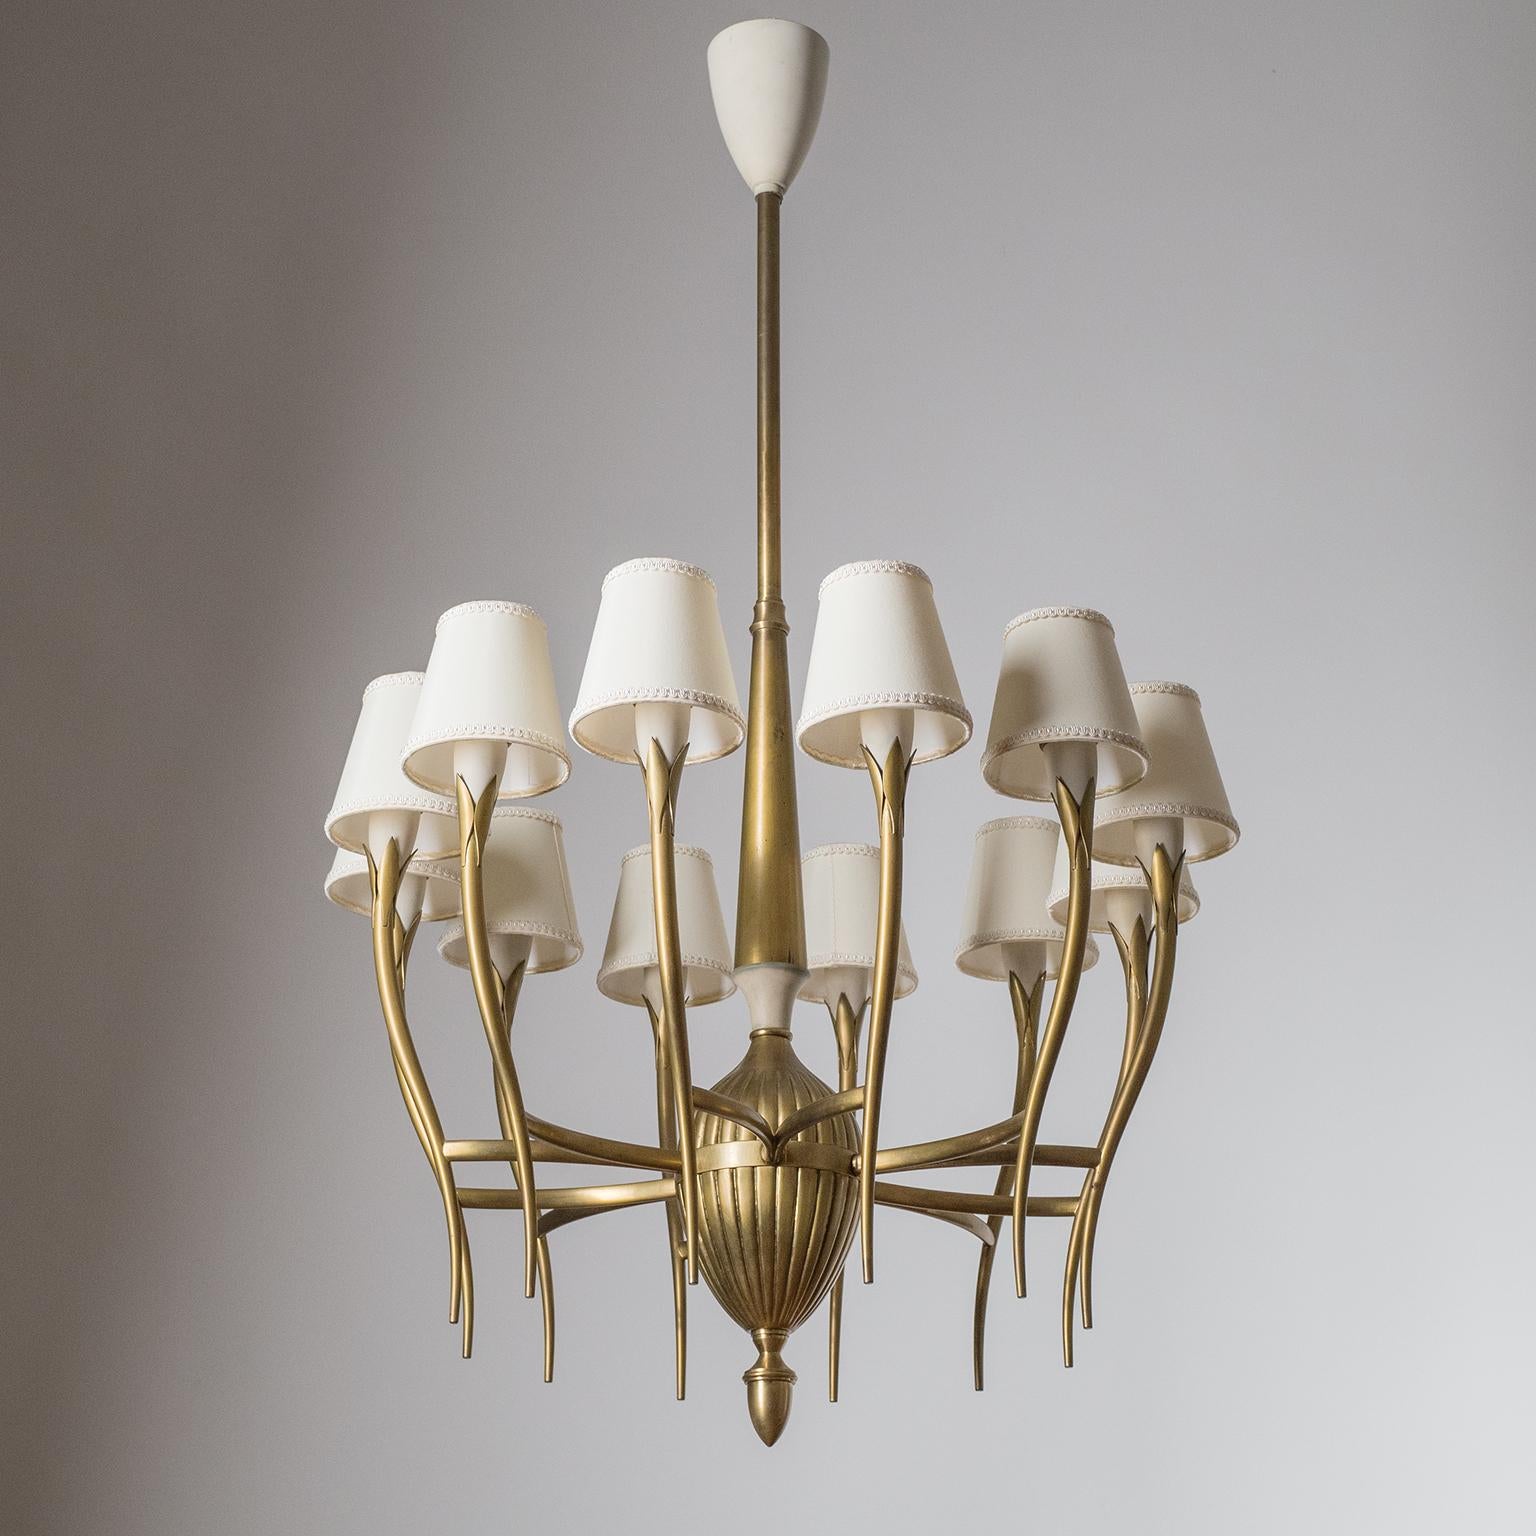 Rare Italian brass chandelier from the 1930-1940s. 12 sensuously curved satin brass arms with off-white lacquered socket covers - each with an original brass E14 socket with new wiring and shades.